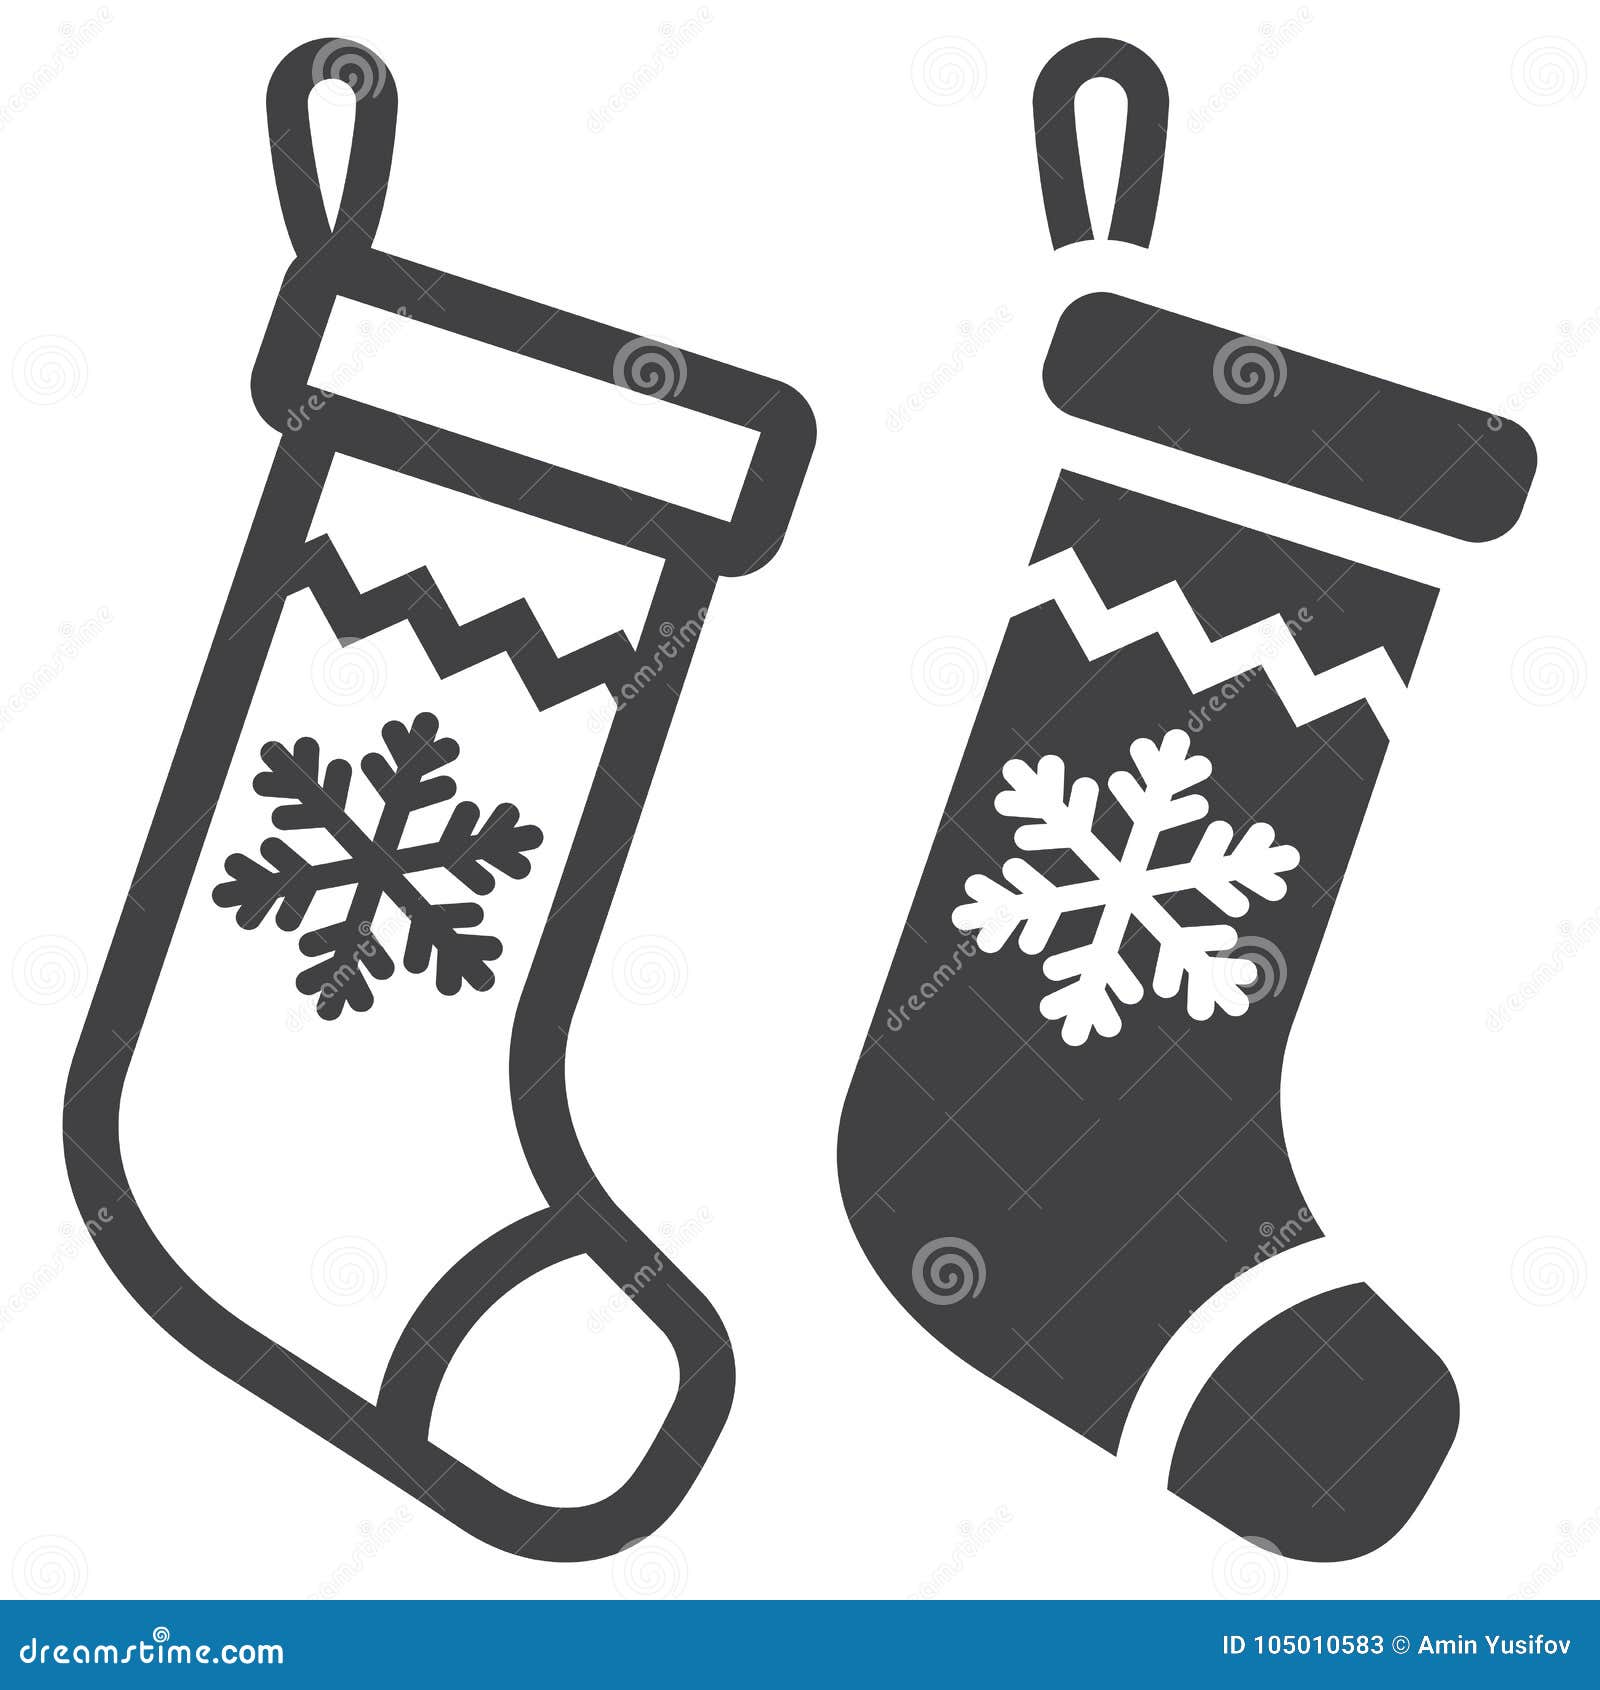 https://thumbs.dreamstime.com/z/christmas-stocking-line-glyph-icon-new-year-xmas-gift-sign-vector-graphics-linear-pattern-white-background-eps-105010583.jpg